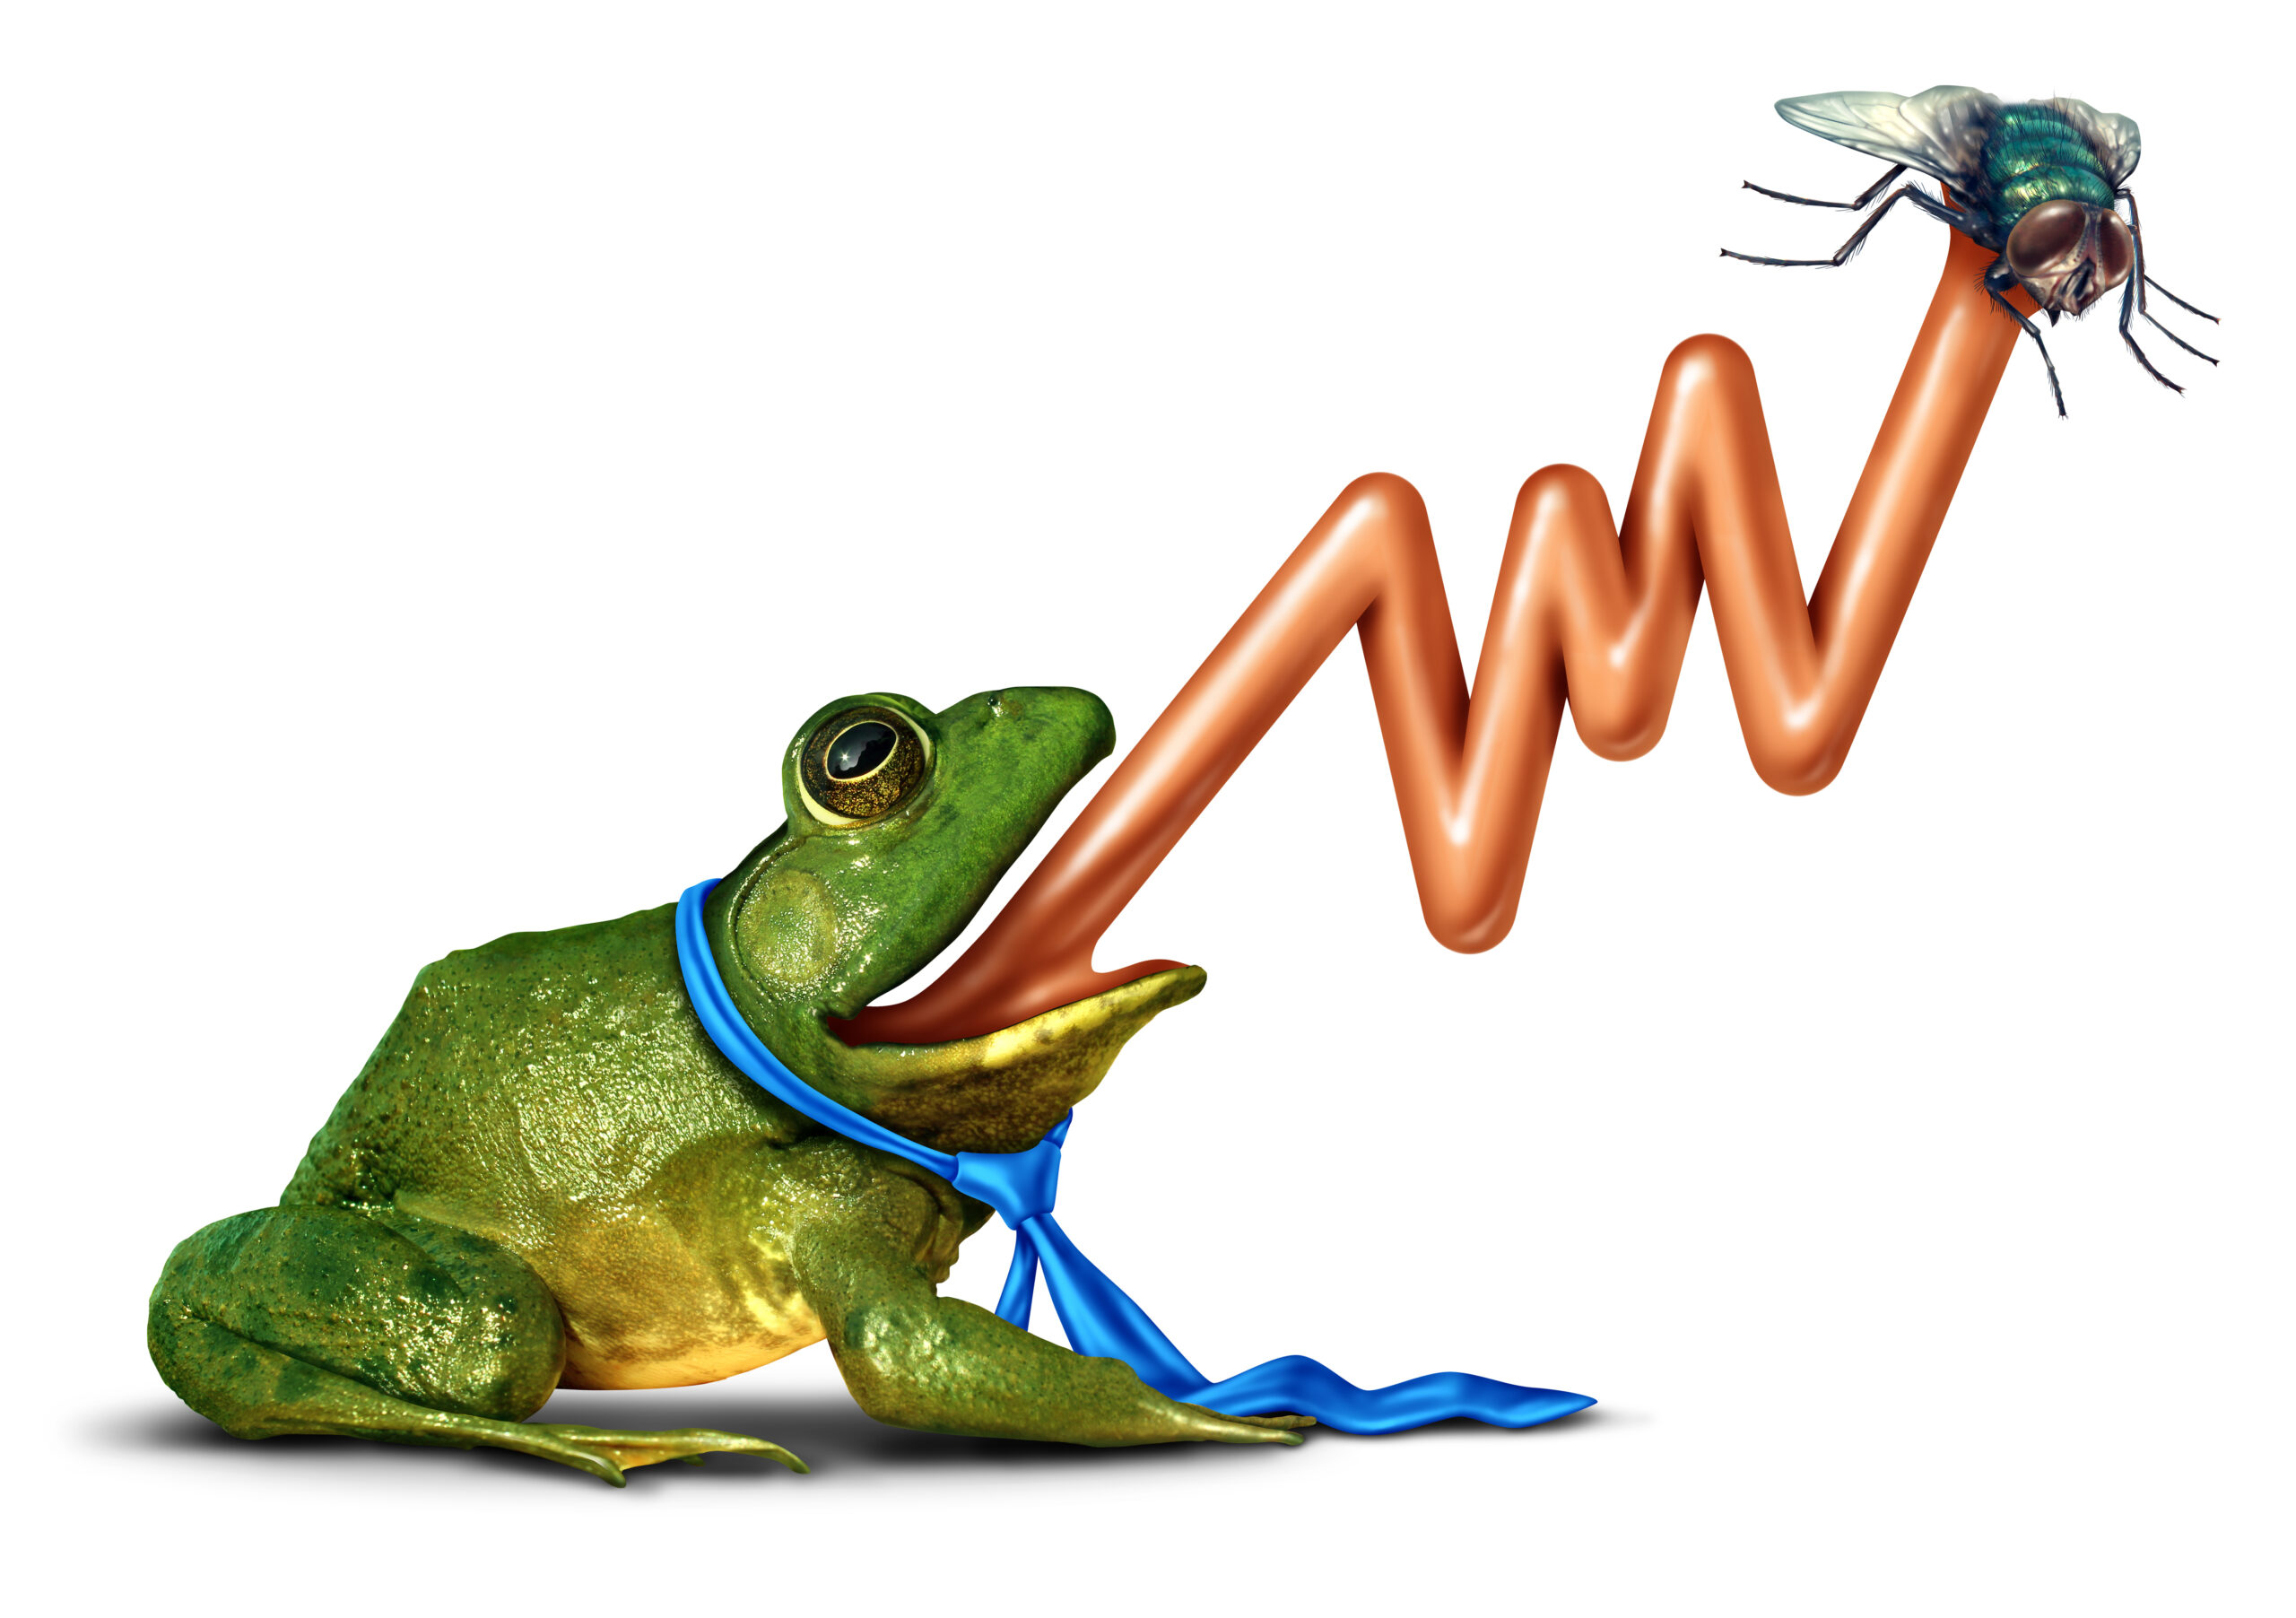 Frog wearing a tie with a tongue shaped as an upward stock market chart catching a bug